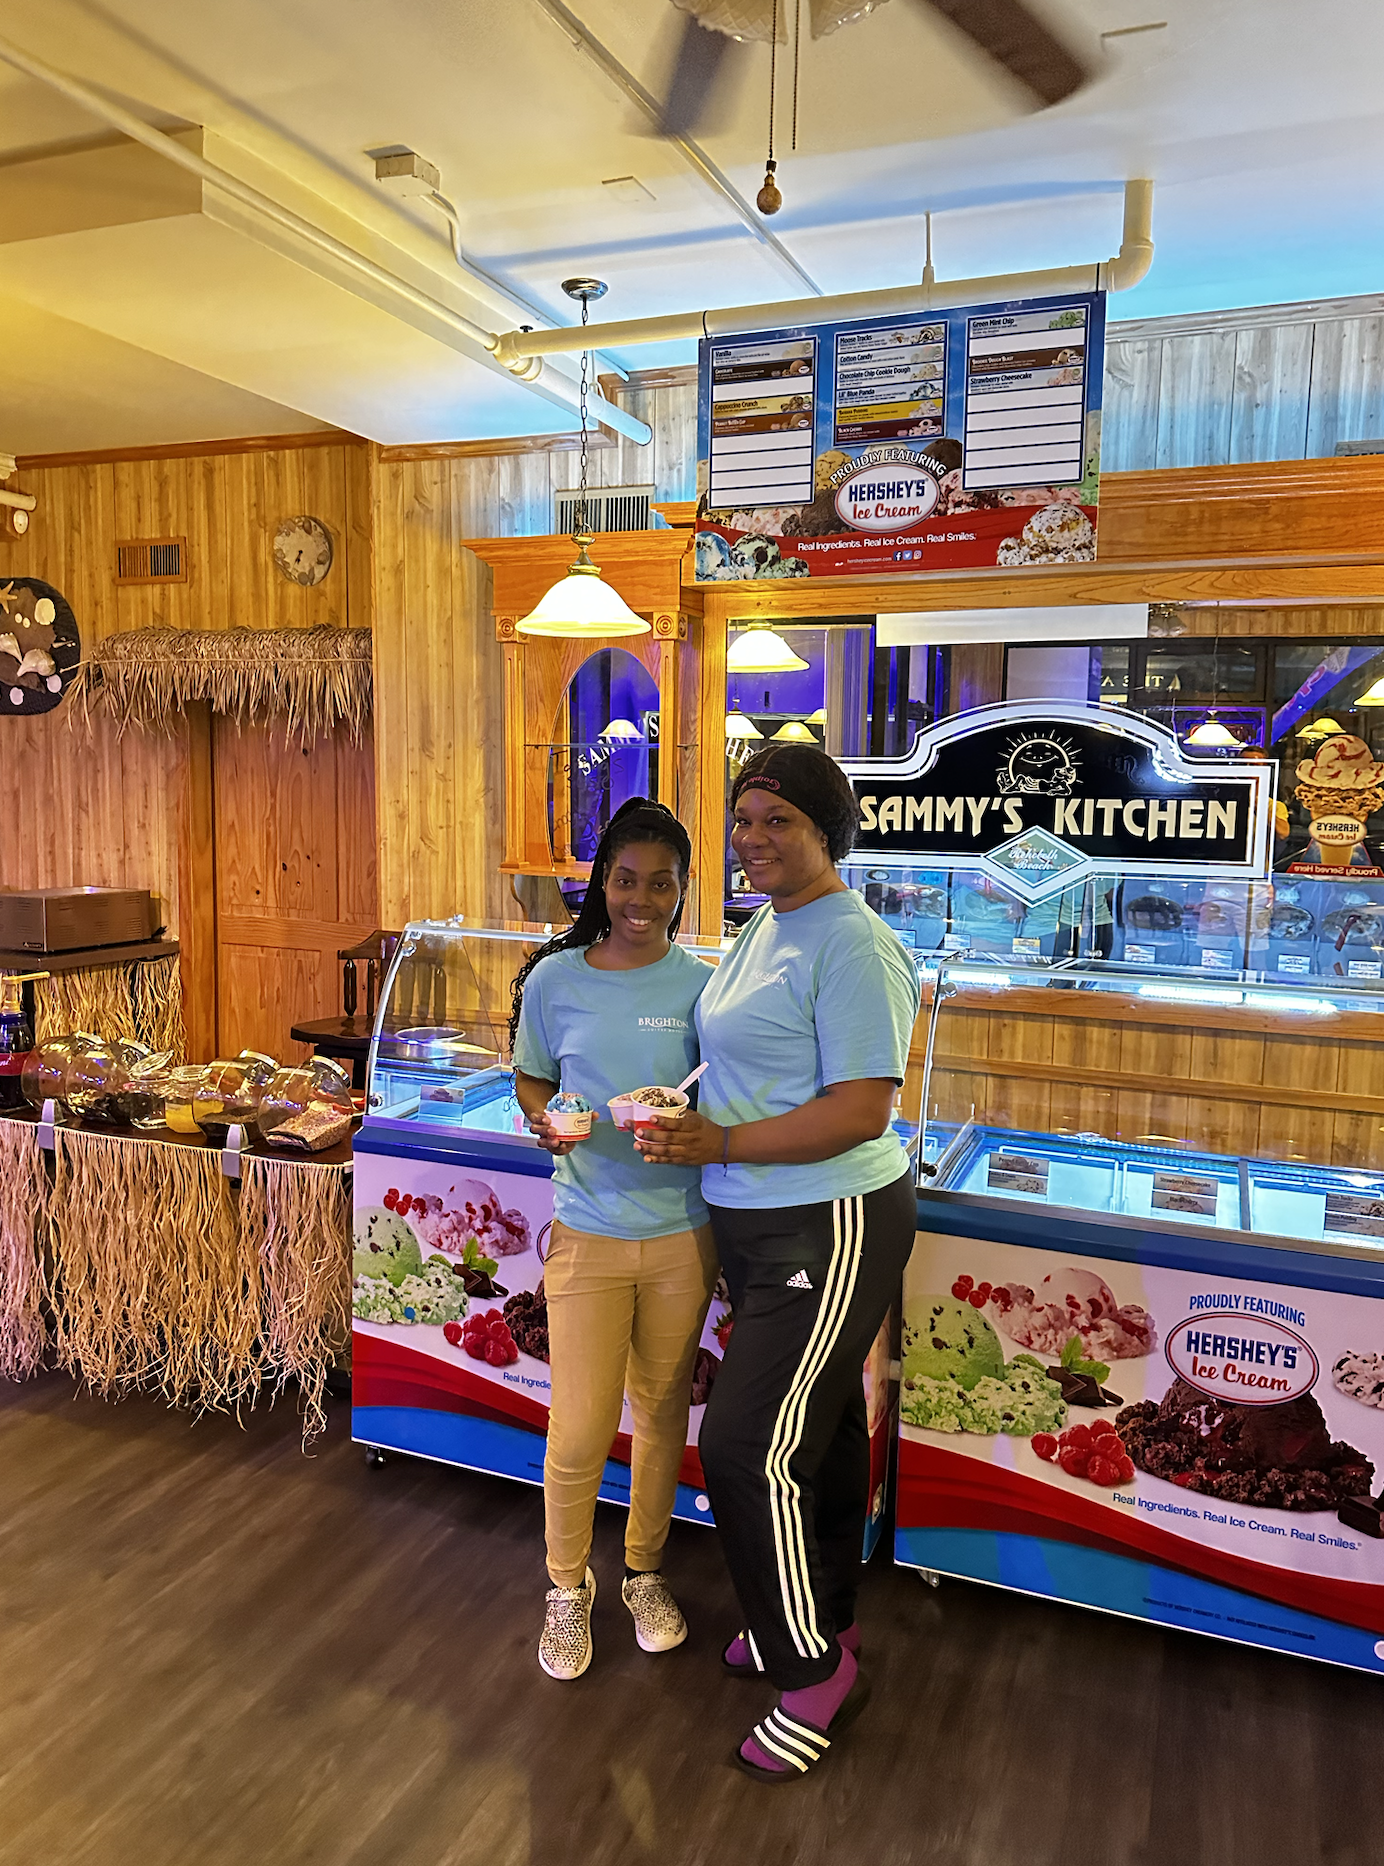  Our friends at the Brighton Suites getting free ice cream on opening day. Standing in front of a beachy wall. standing in a very beachy room.  The room is very cozy.  